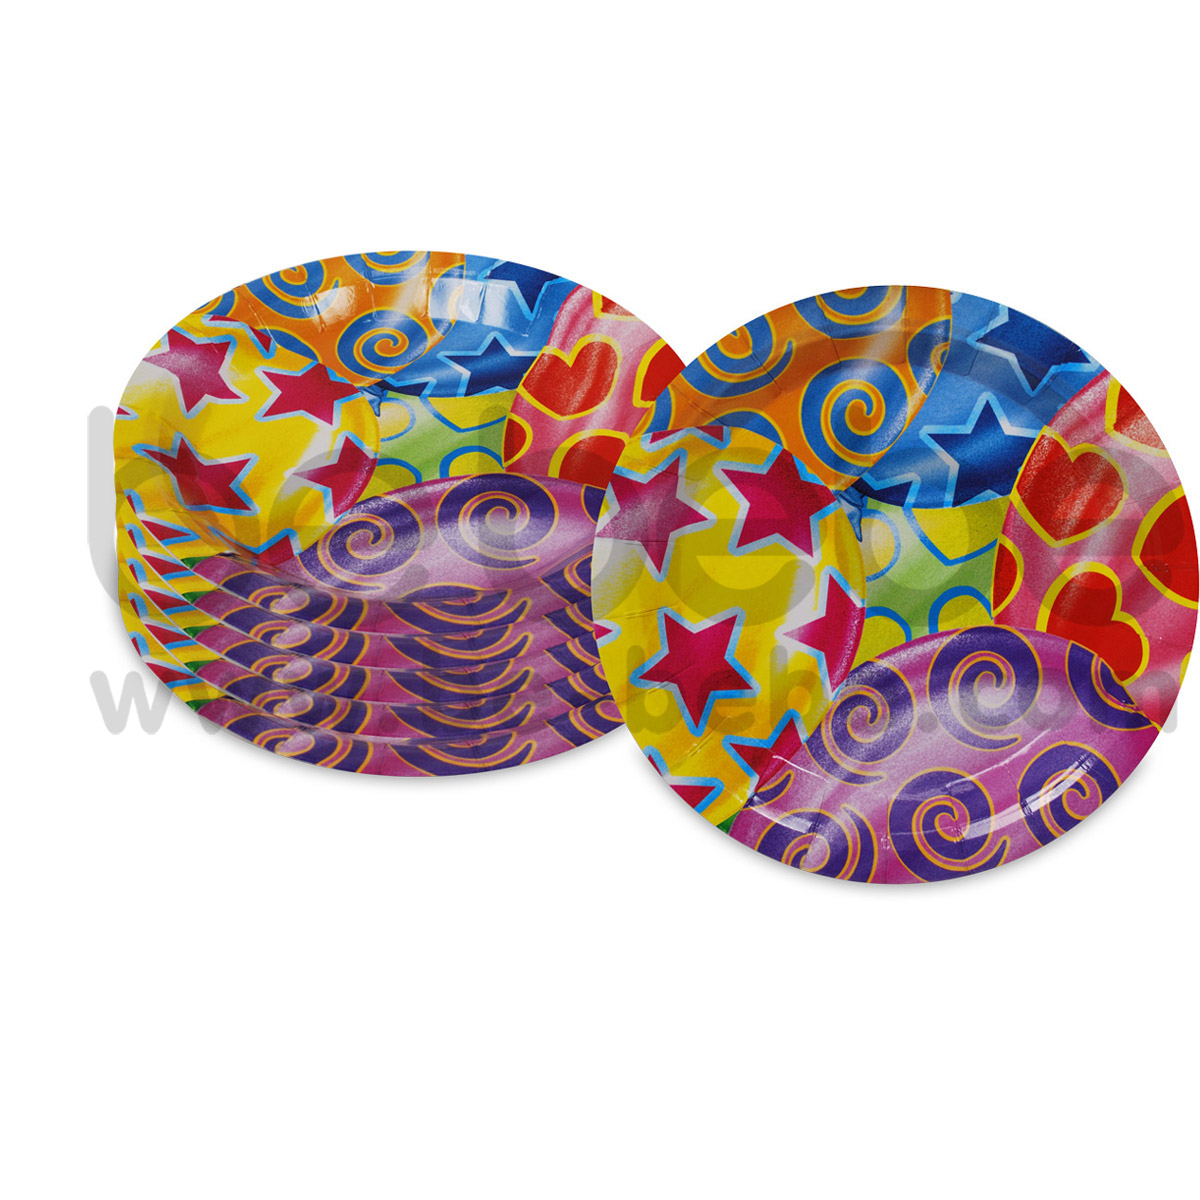 PARTY BUG : Paper plate 9 inch., 1 Pack